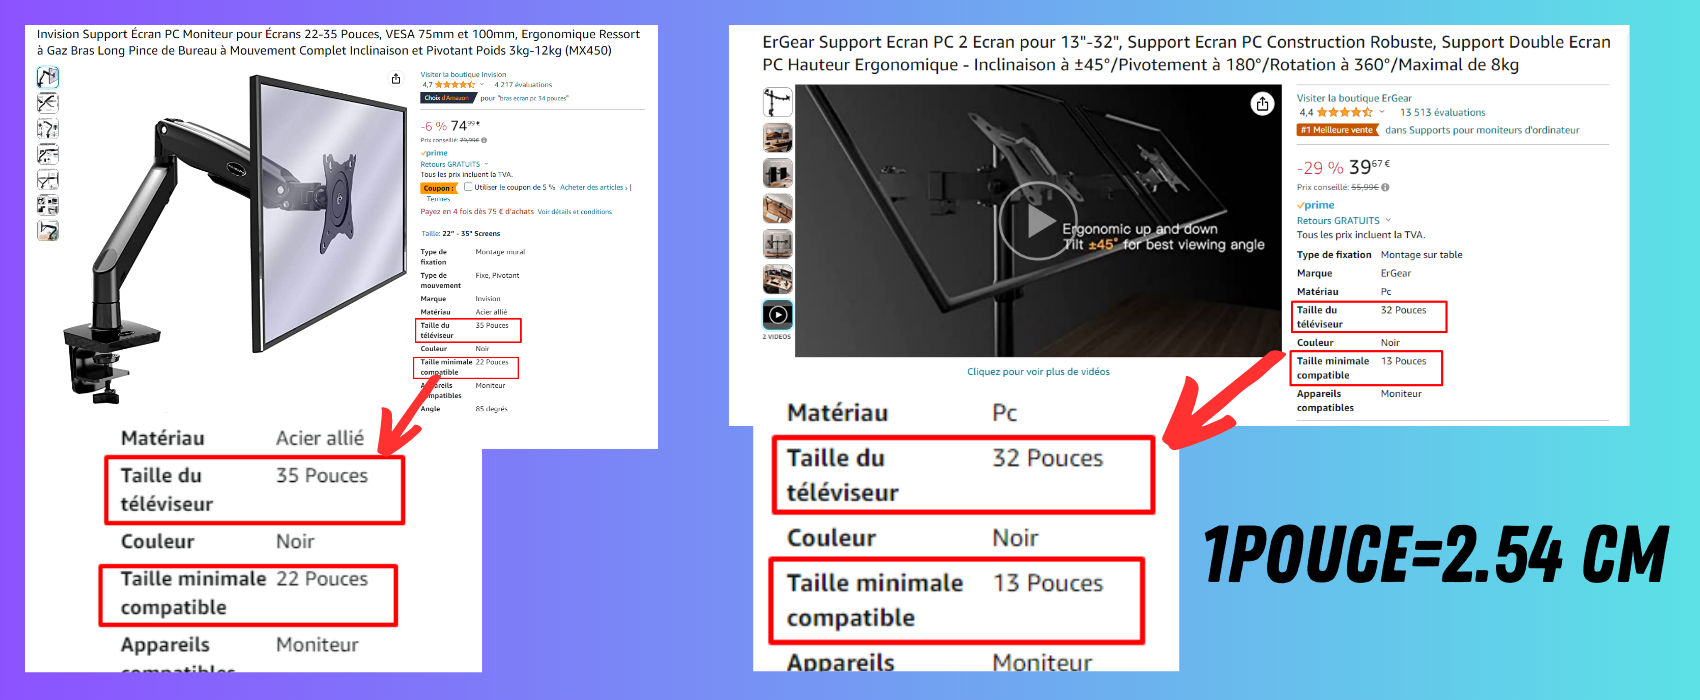 Guide Ultime des Supports Écrans 2023 : Choix, Installation & Astuces –  Craft Kittiesfr